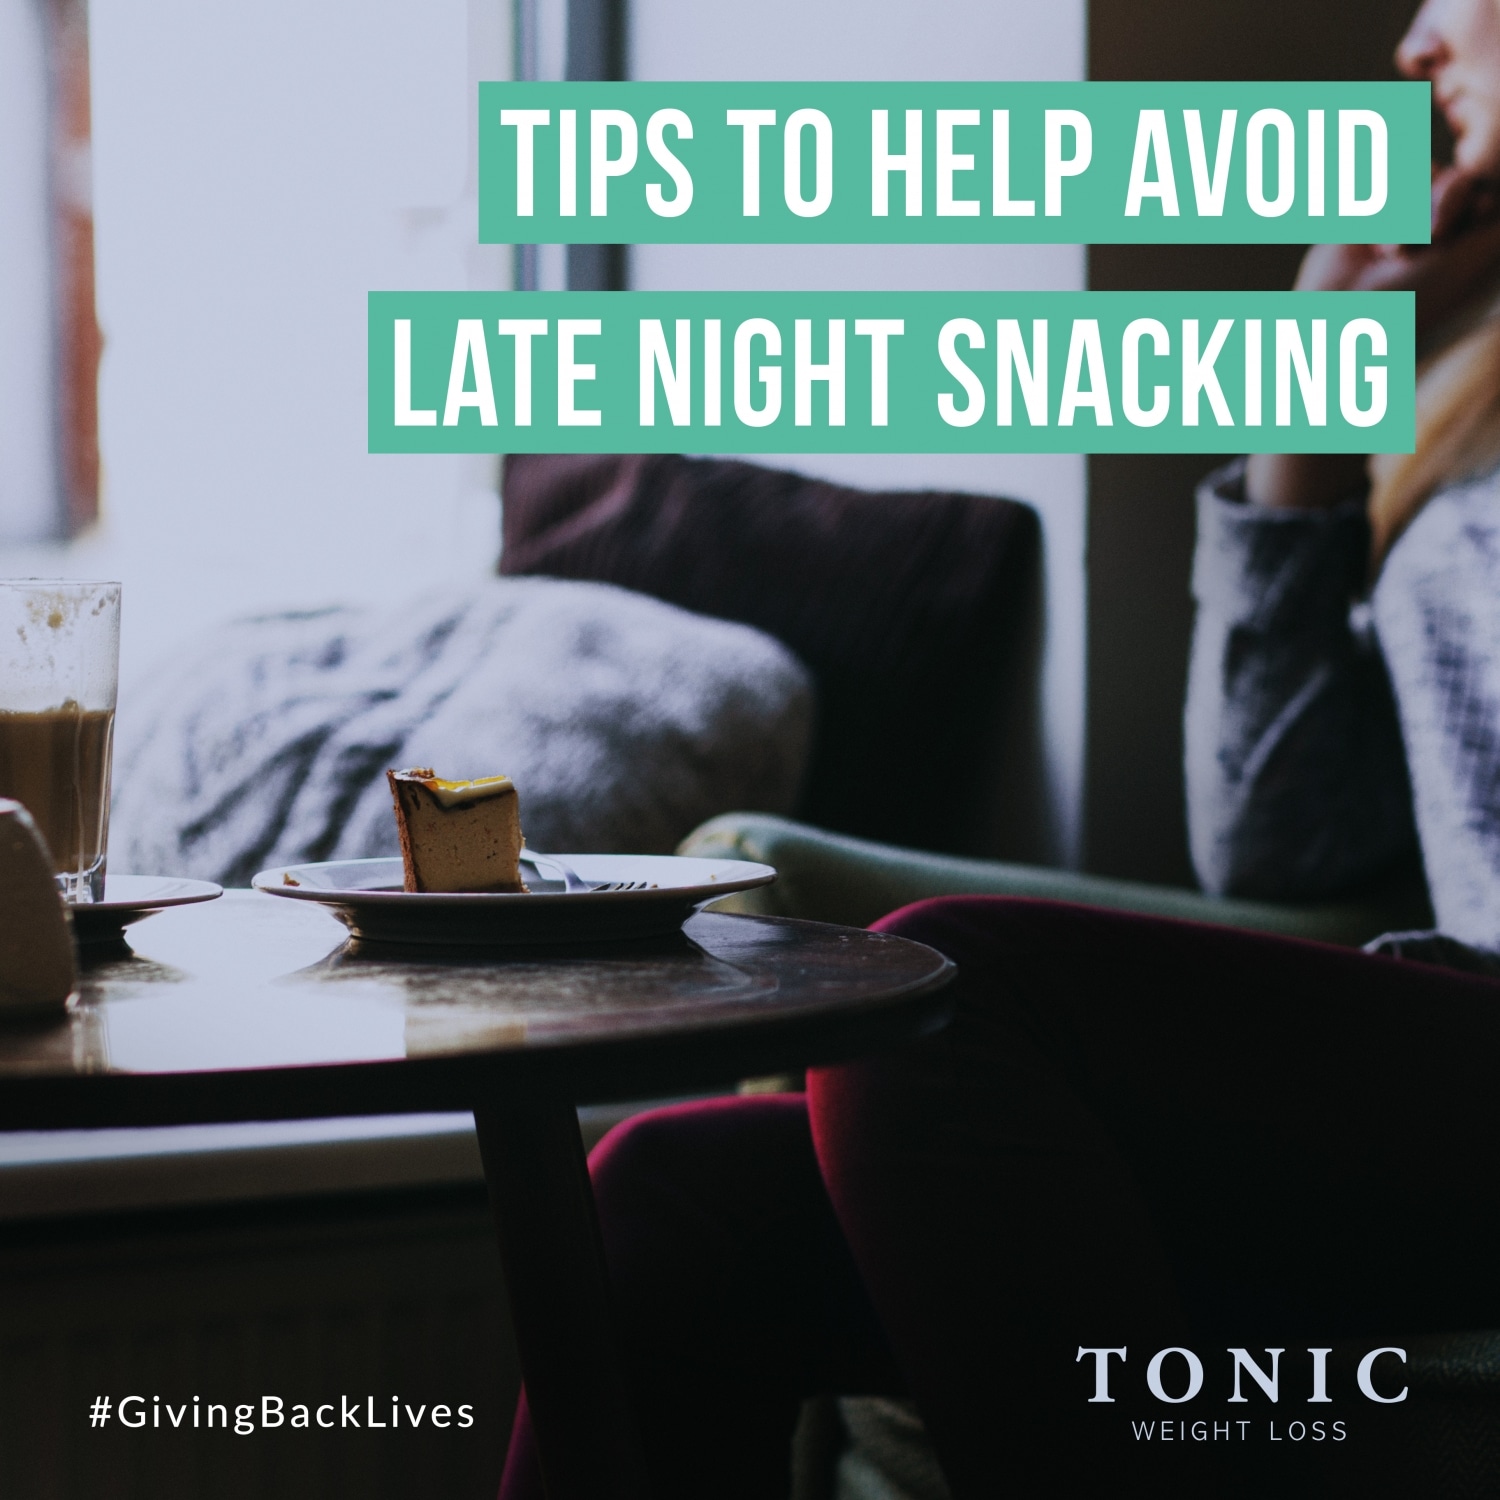 Tonic Weight Loss Surgery UK Tips to help avoid late night snacking